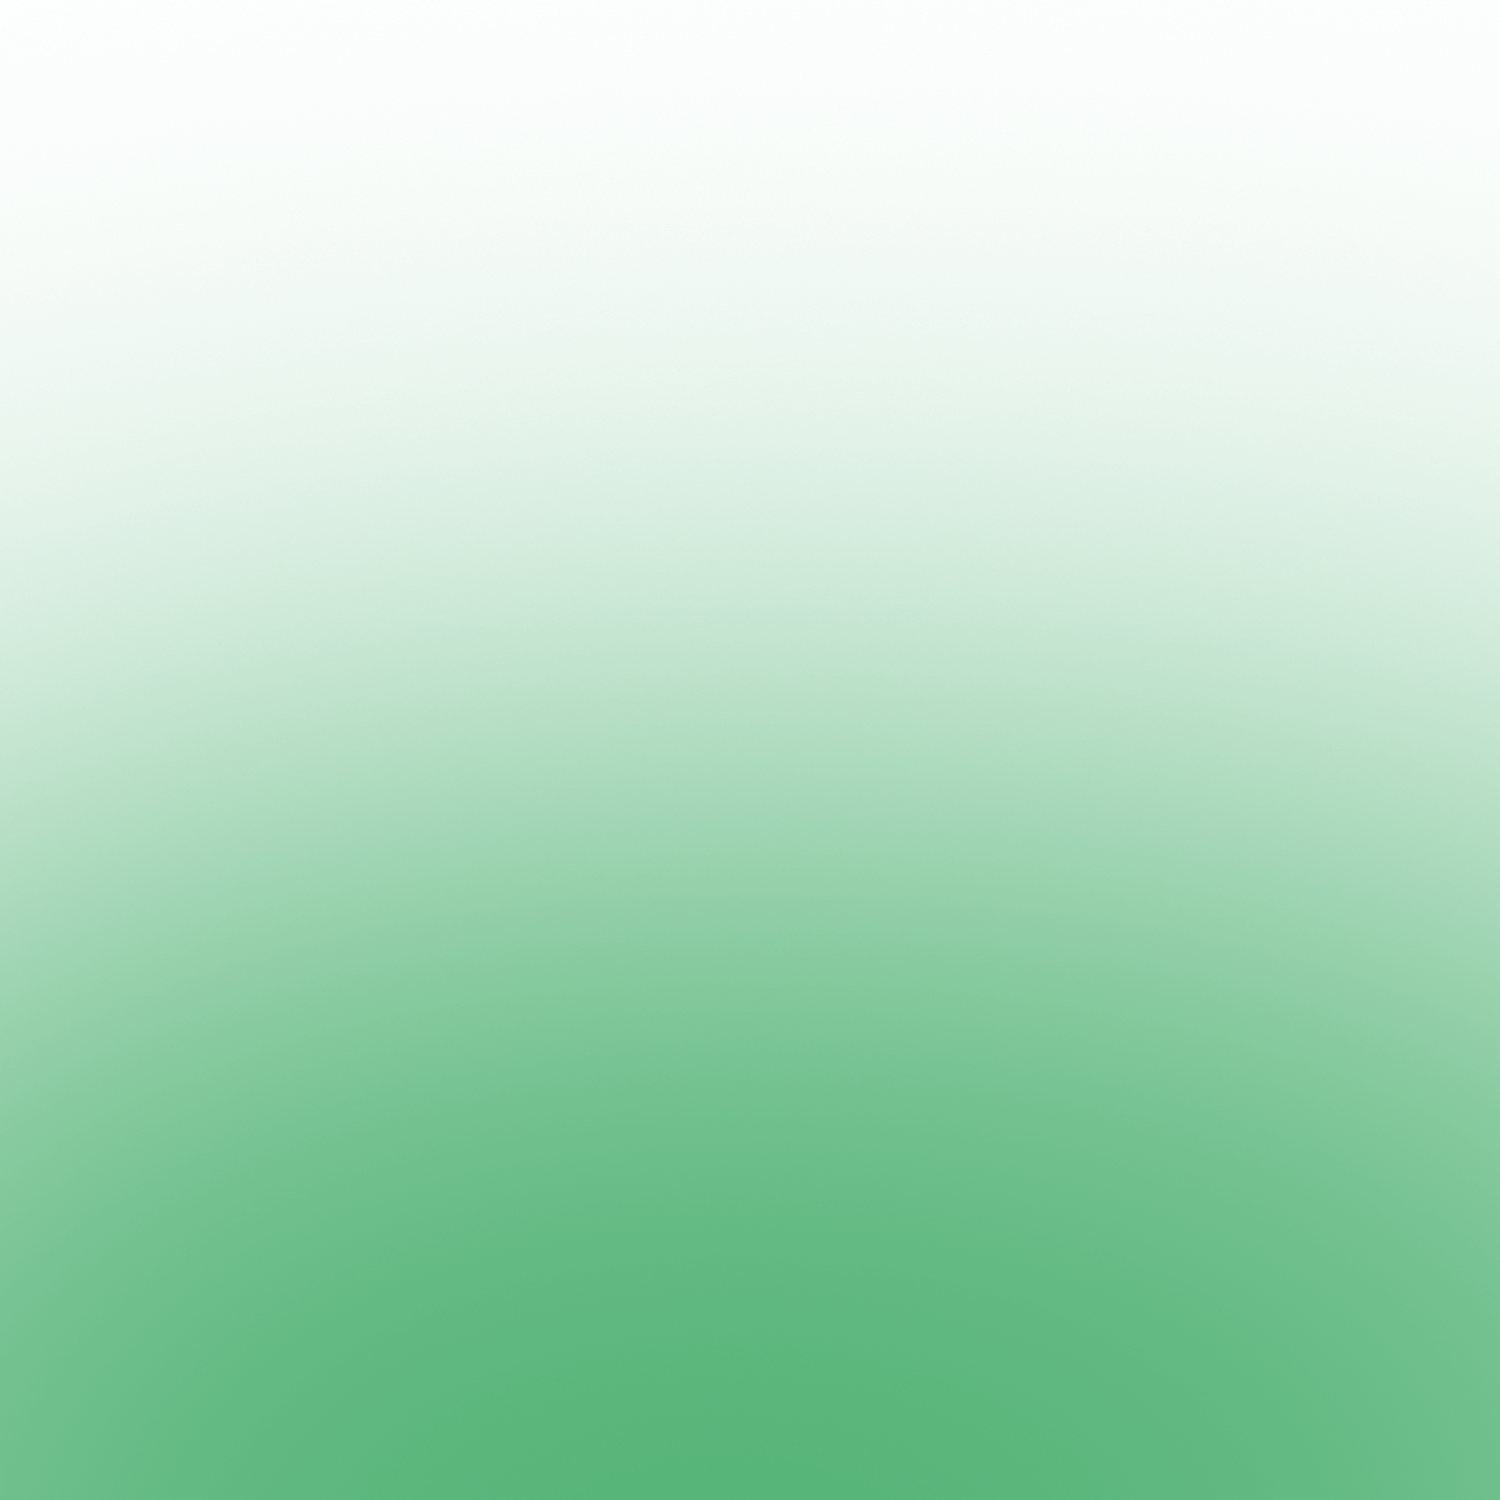 Green Gradient Background Fading Effect